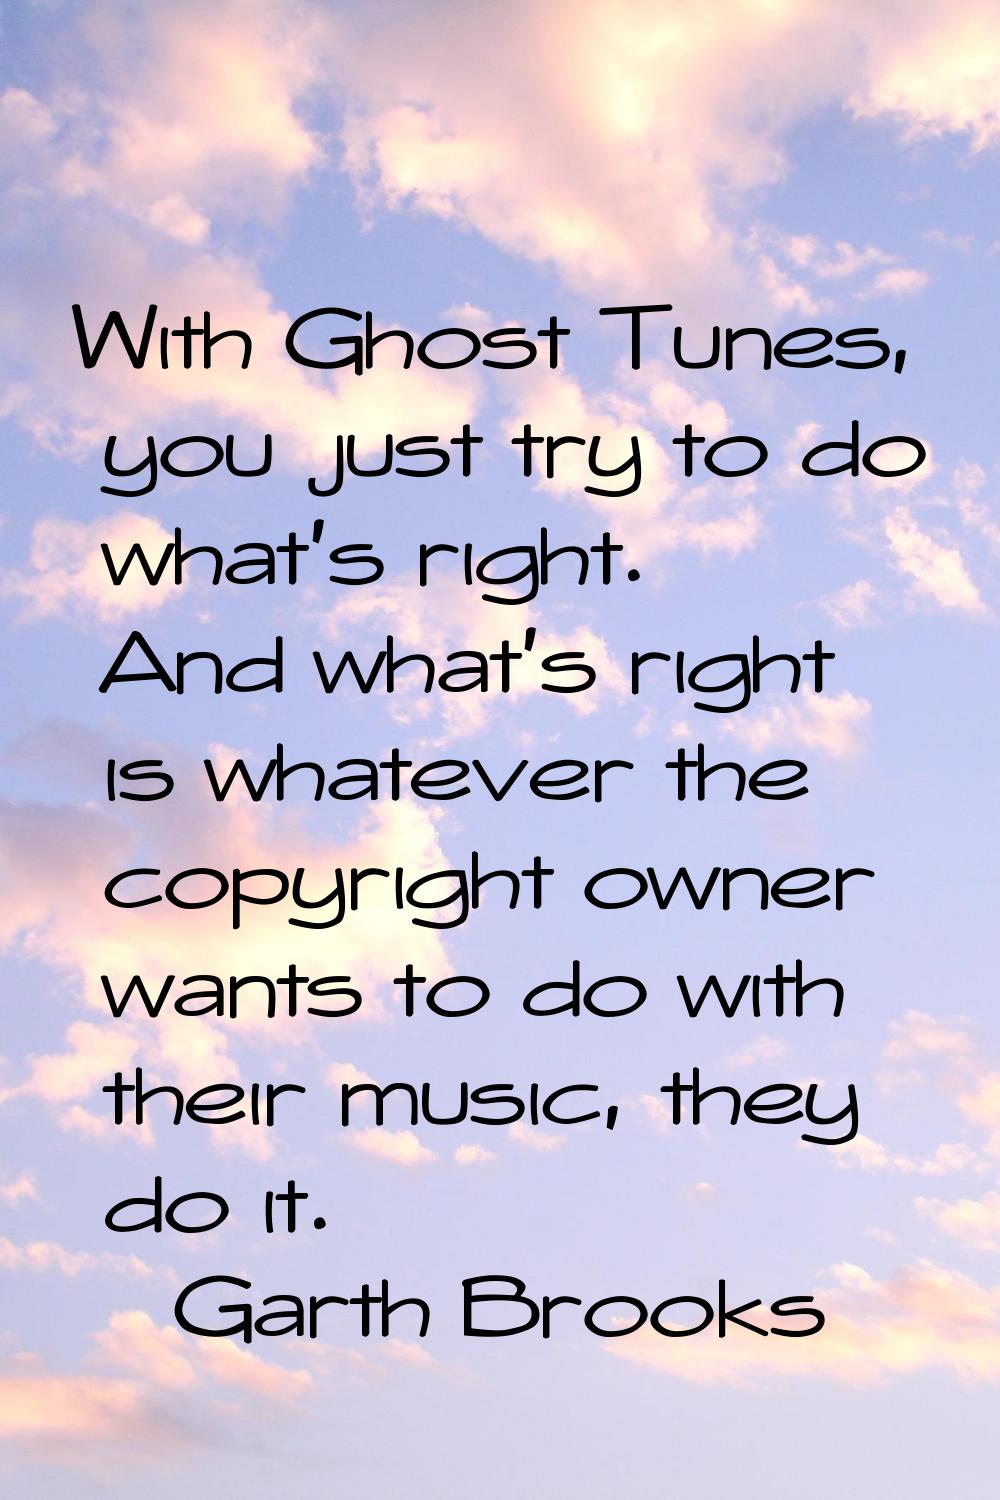 With Ghost Tunes, you just try to do what's right. And what's right is whatever the copyright owner